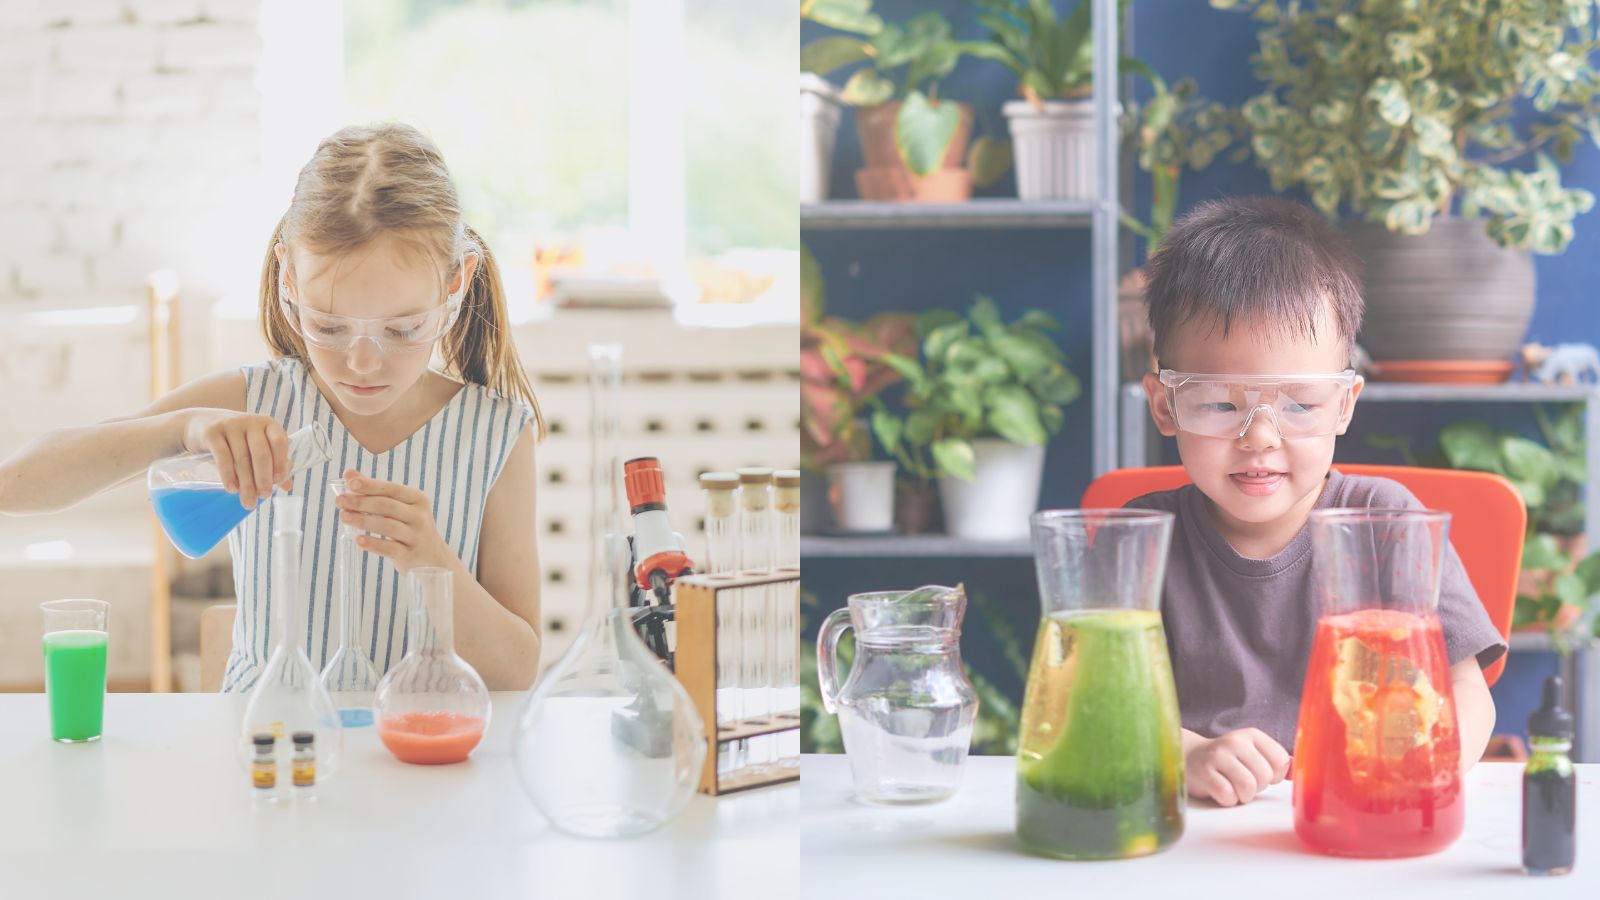 Young girl pouring blue liquid into beaker; young boy looking at red and green liquid in beakers